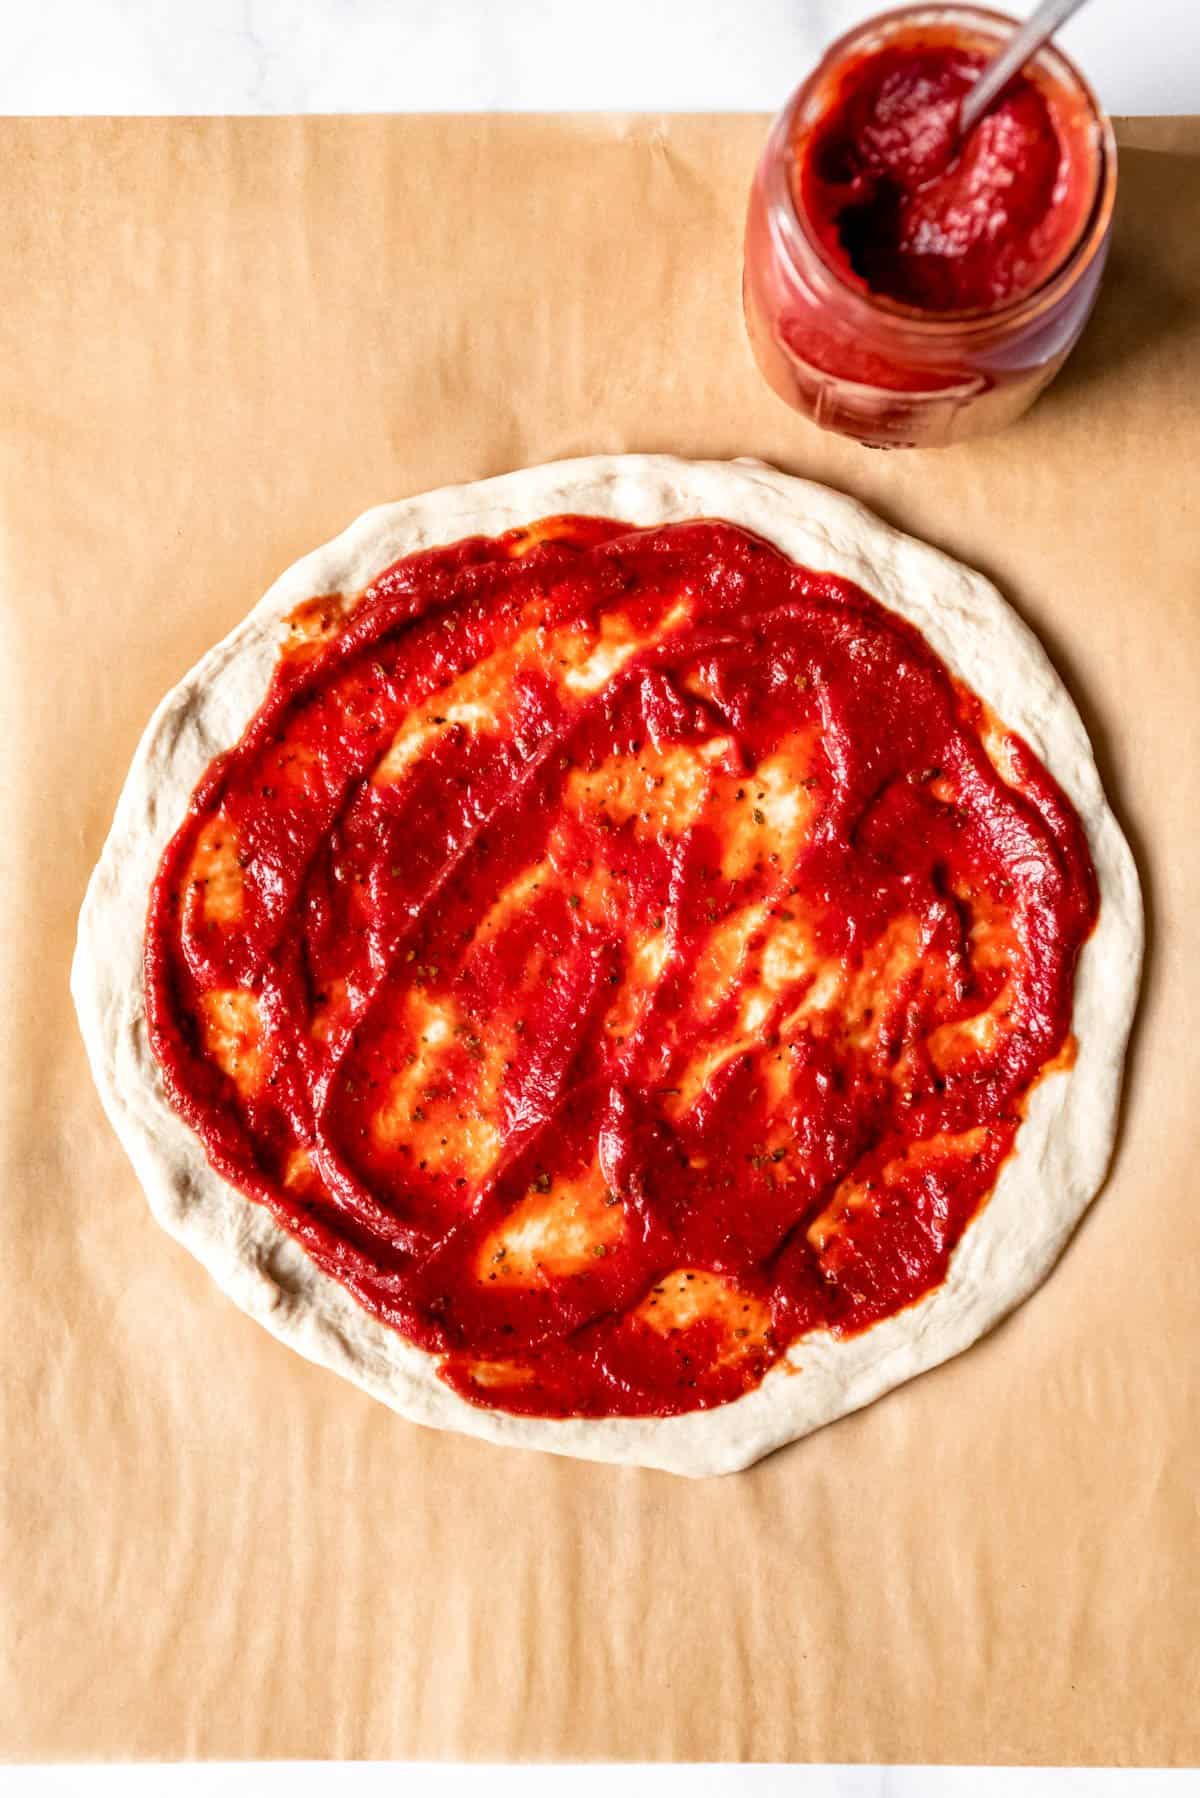 An image of pizza dough topped with homemade pizza sauce.